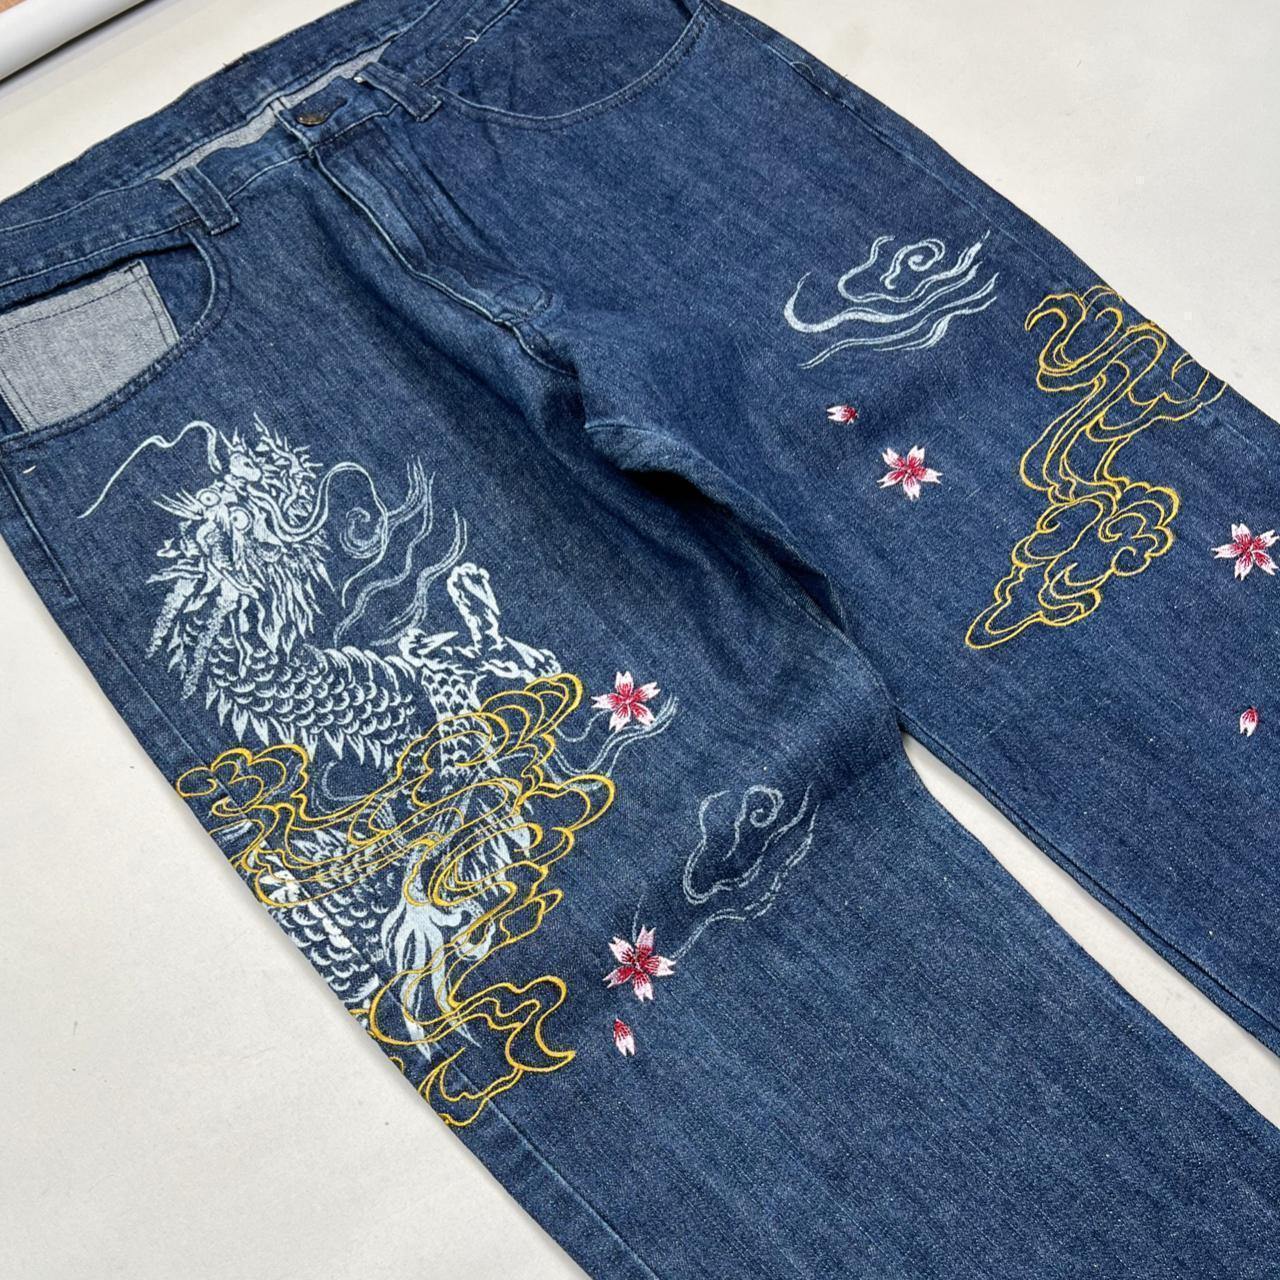 Authentic Vintage Embroidered Japanese Denim Jeans (36")